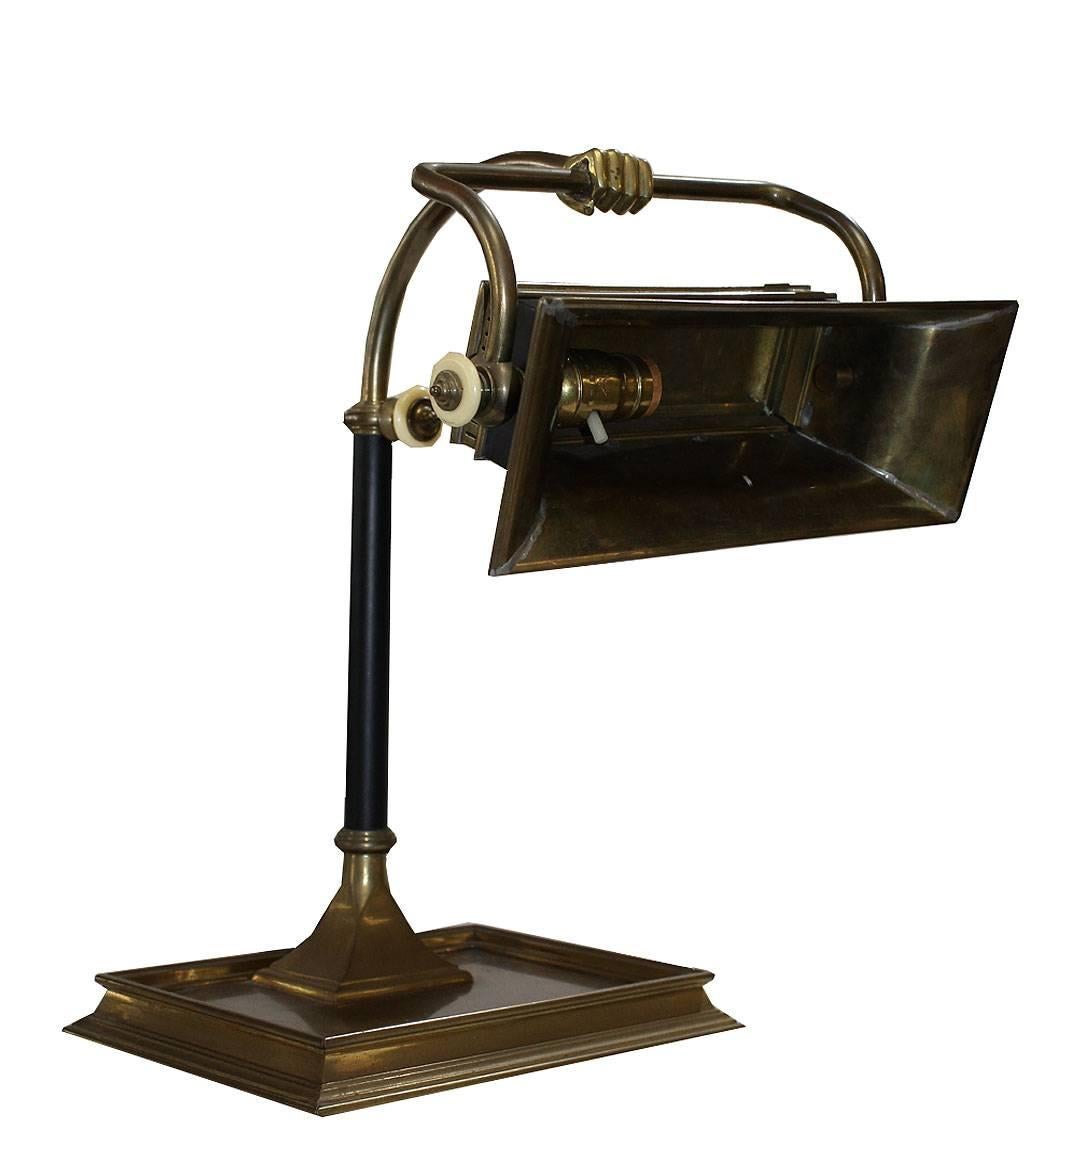 Brass banker lamp with brass fist. Works well single switch under the hood. Hood moves freely, heavy weight with solid base. Unique and stylish this is a wonderful lamp for a traditional desk or library piece.